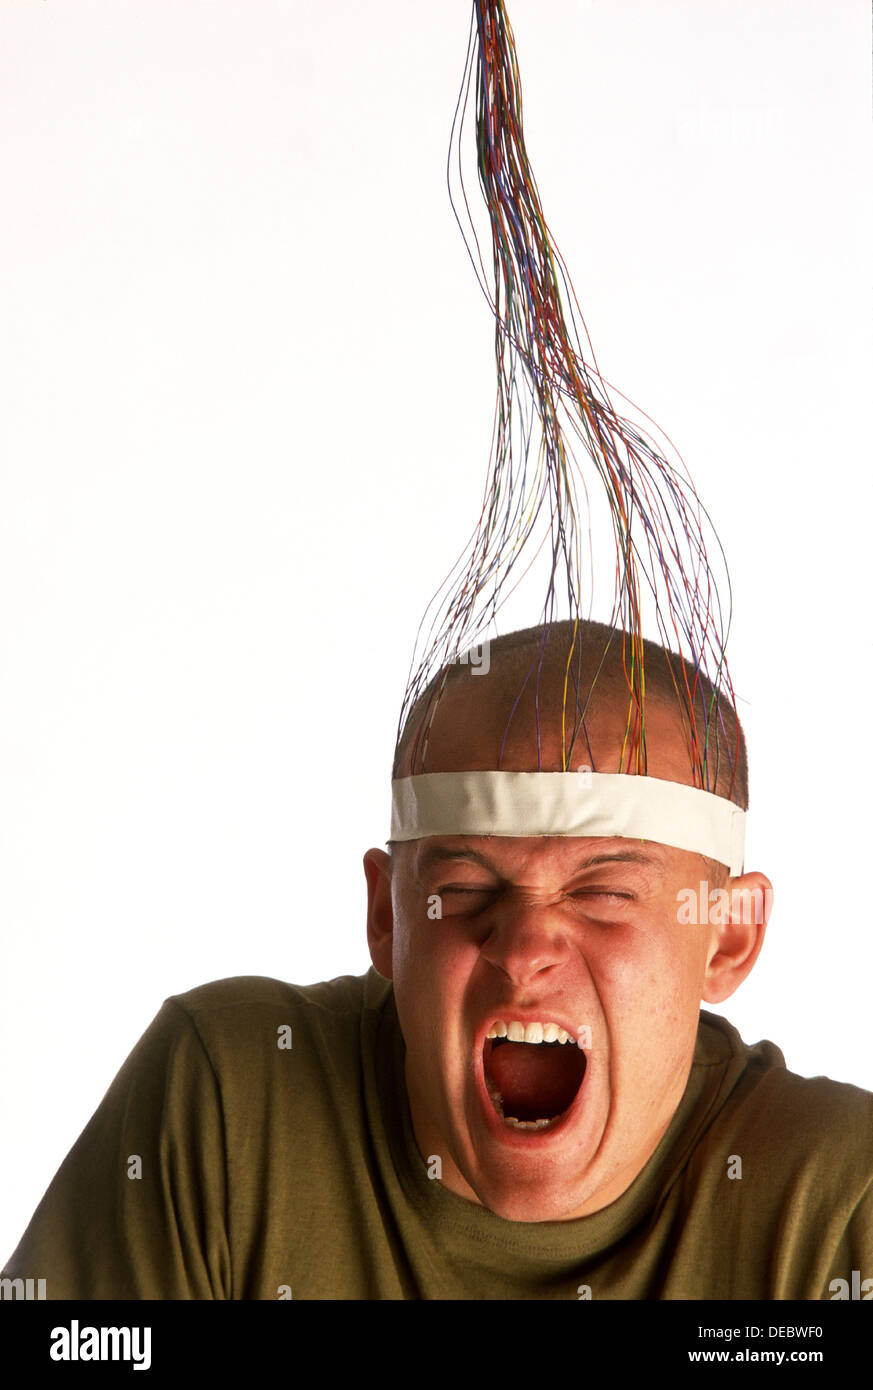 MAN WITH WIRES TAPED TO HIS HEAD Stock Photo - Alamy